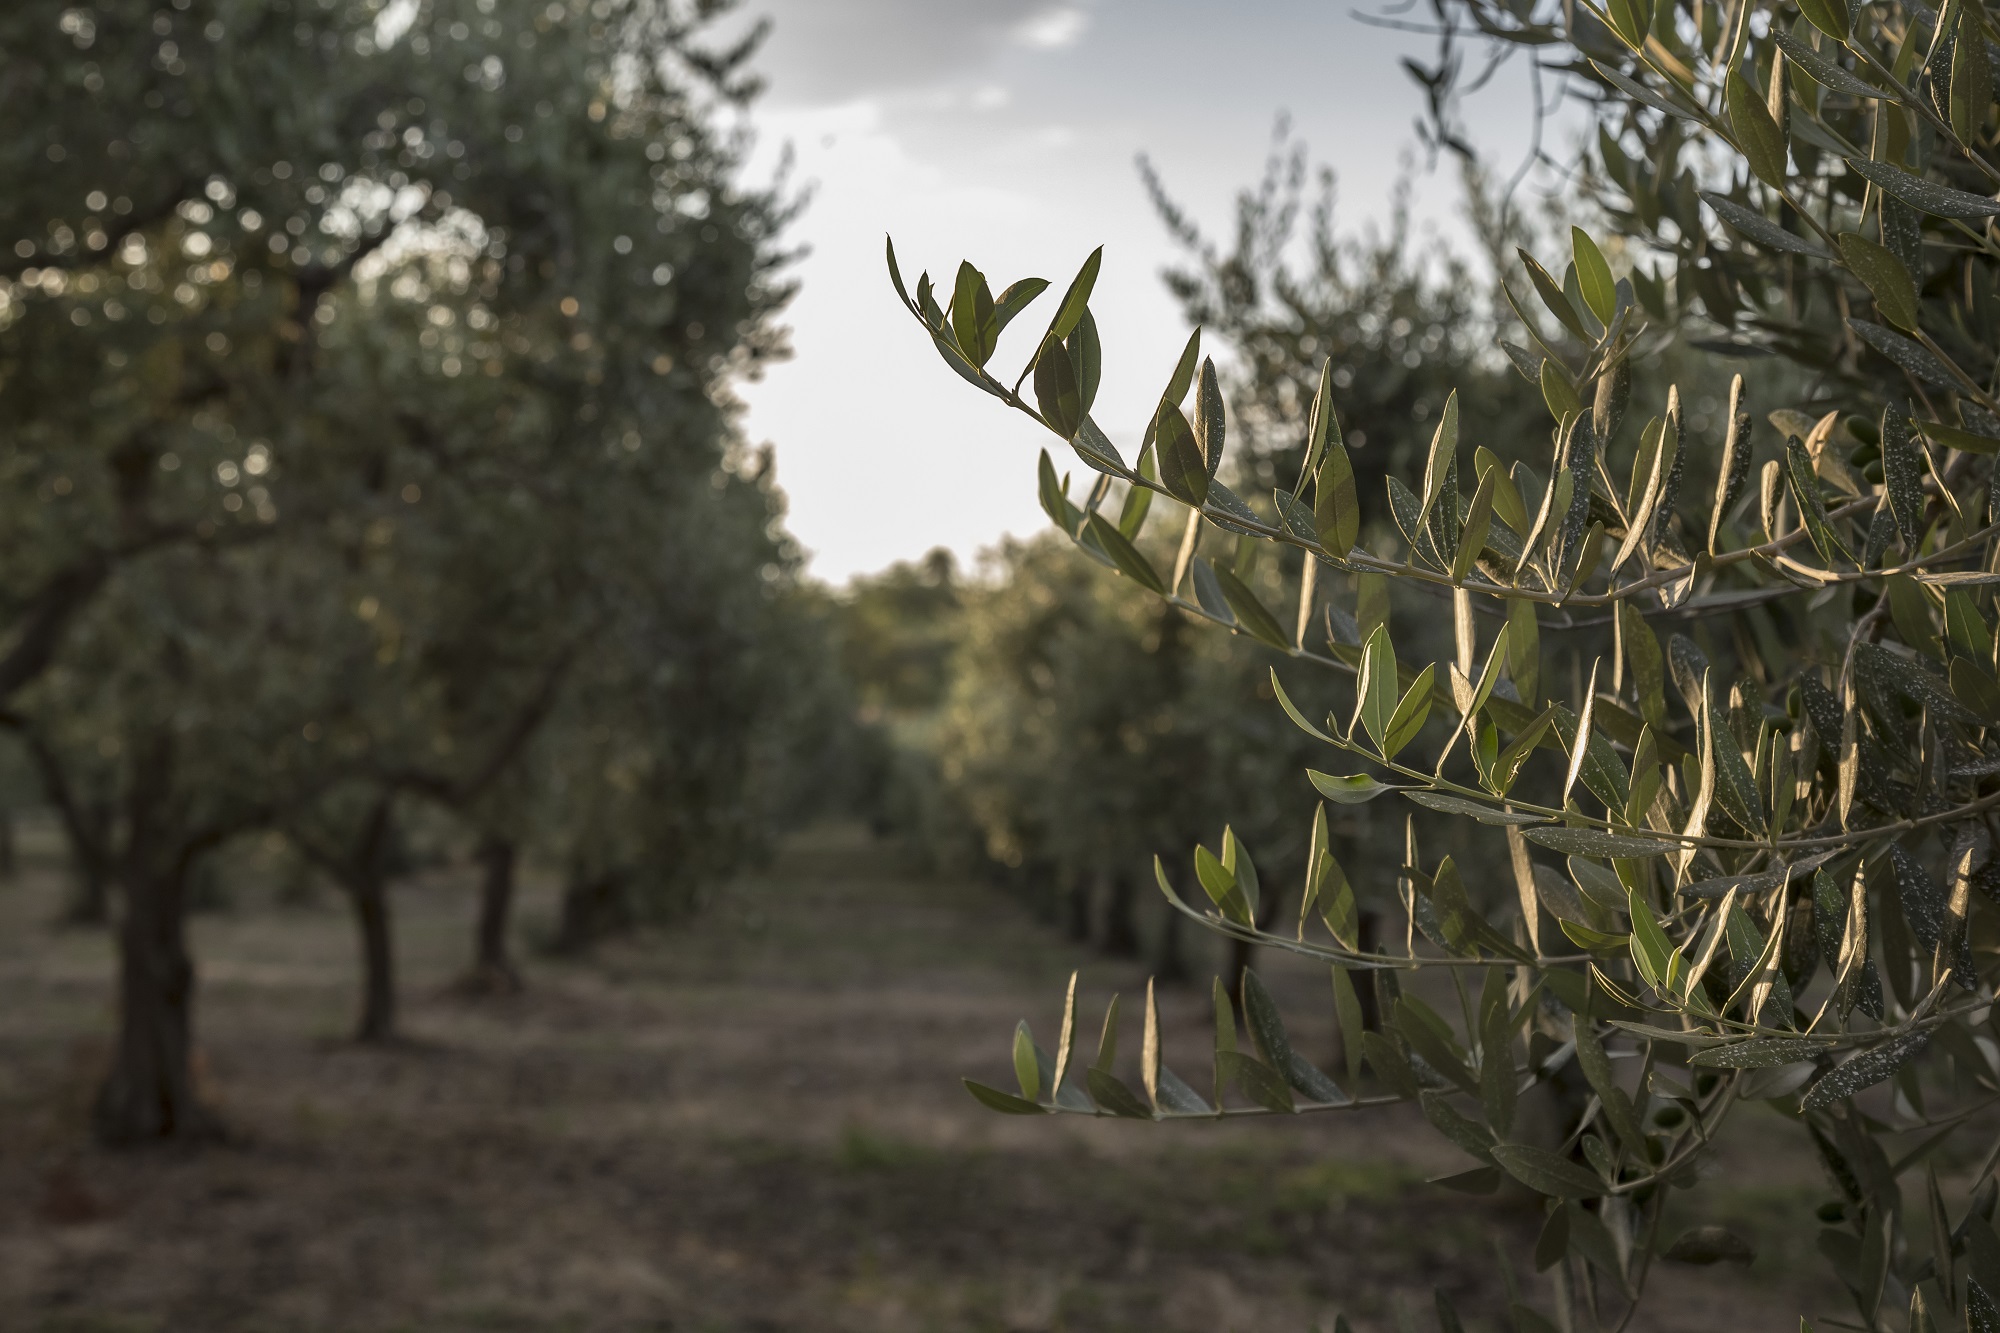 Taste authentic Sicily: visit a farm, the olive grove, and savor a local typical lunch.